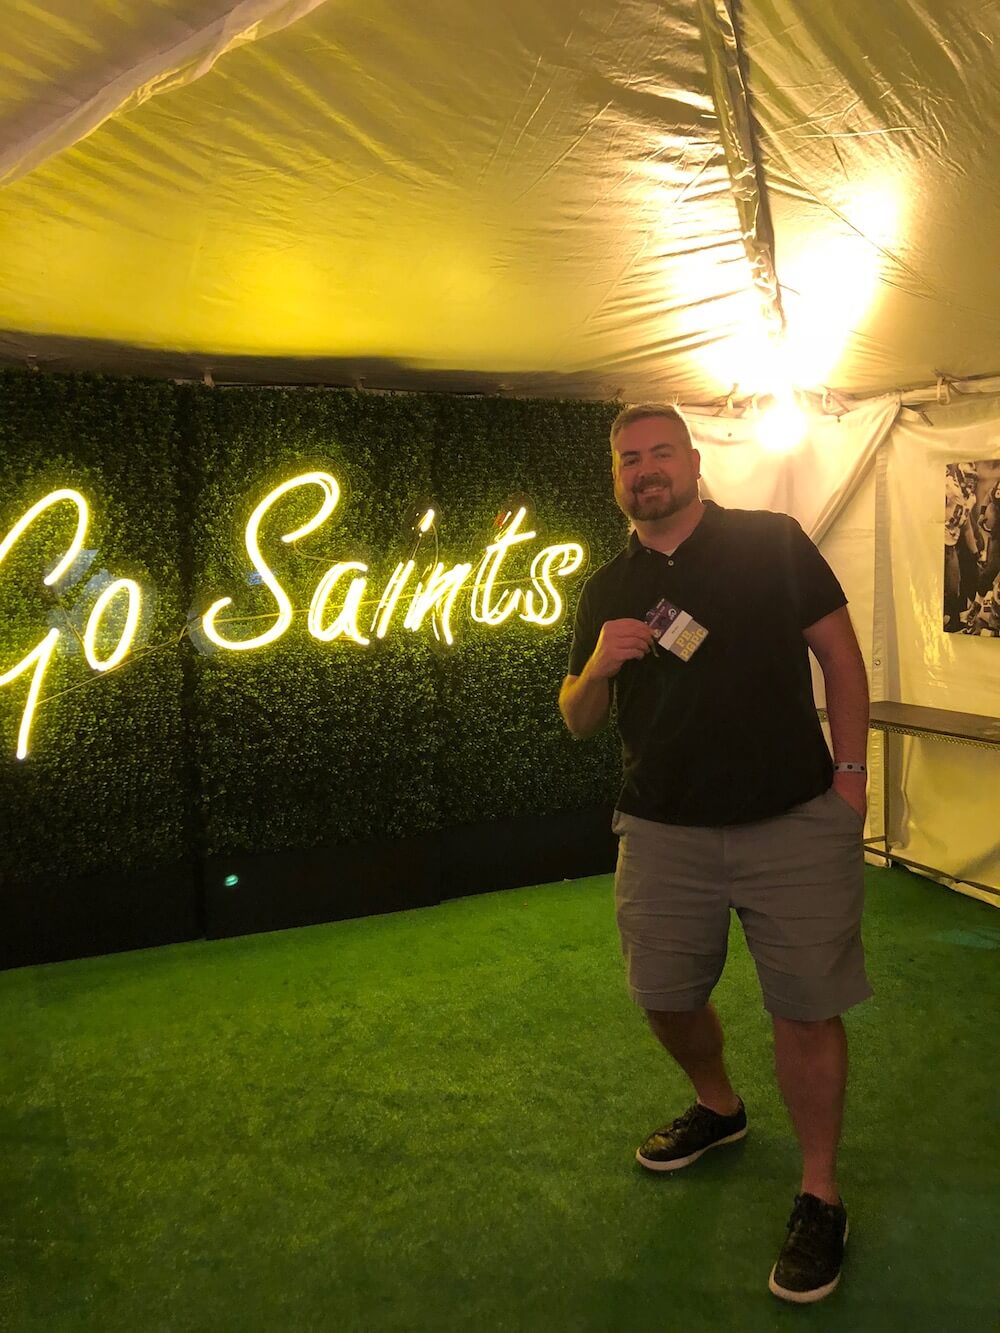 PT at the Saints Game VIP Game day experience from Barclaycard